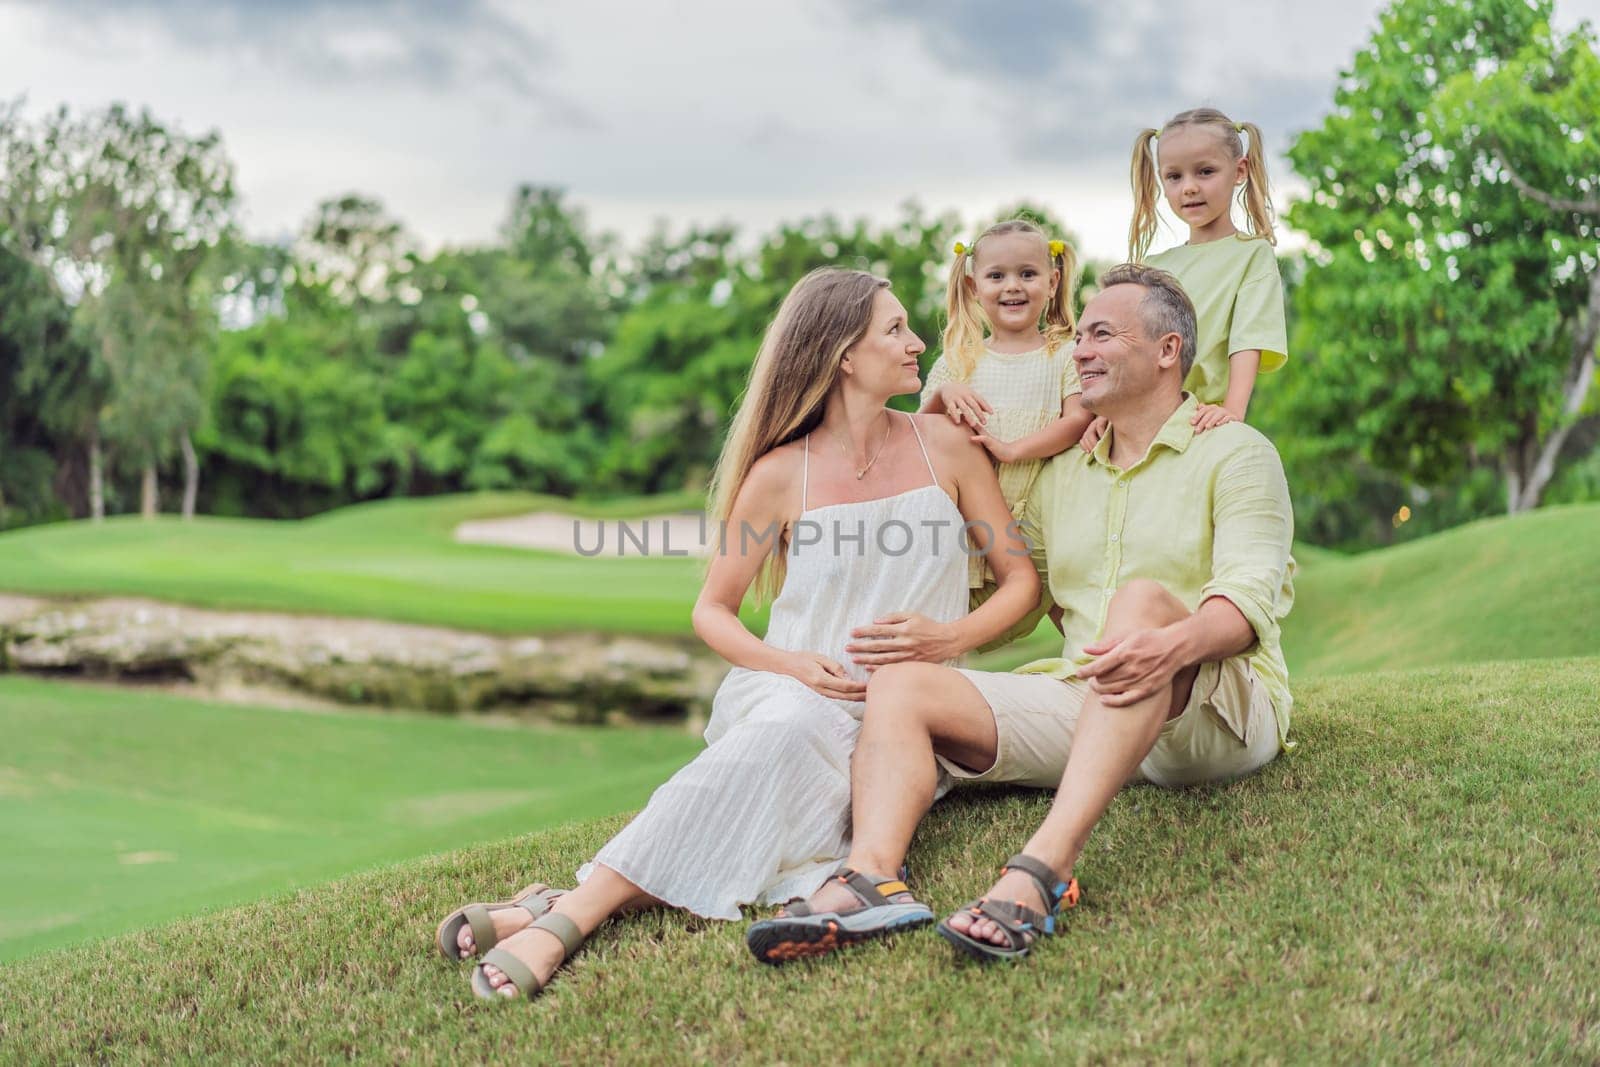 A happy family, two girls, dad, and a pregnant mom, enjoys quality time together on a lush green lawn, creating cherished memories of togetherness by galitskaya